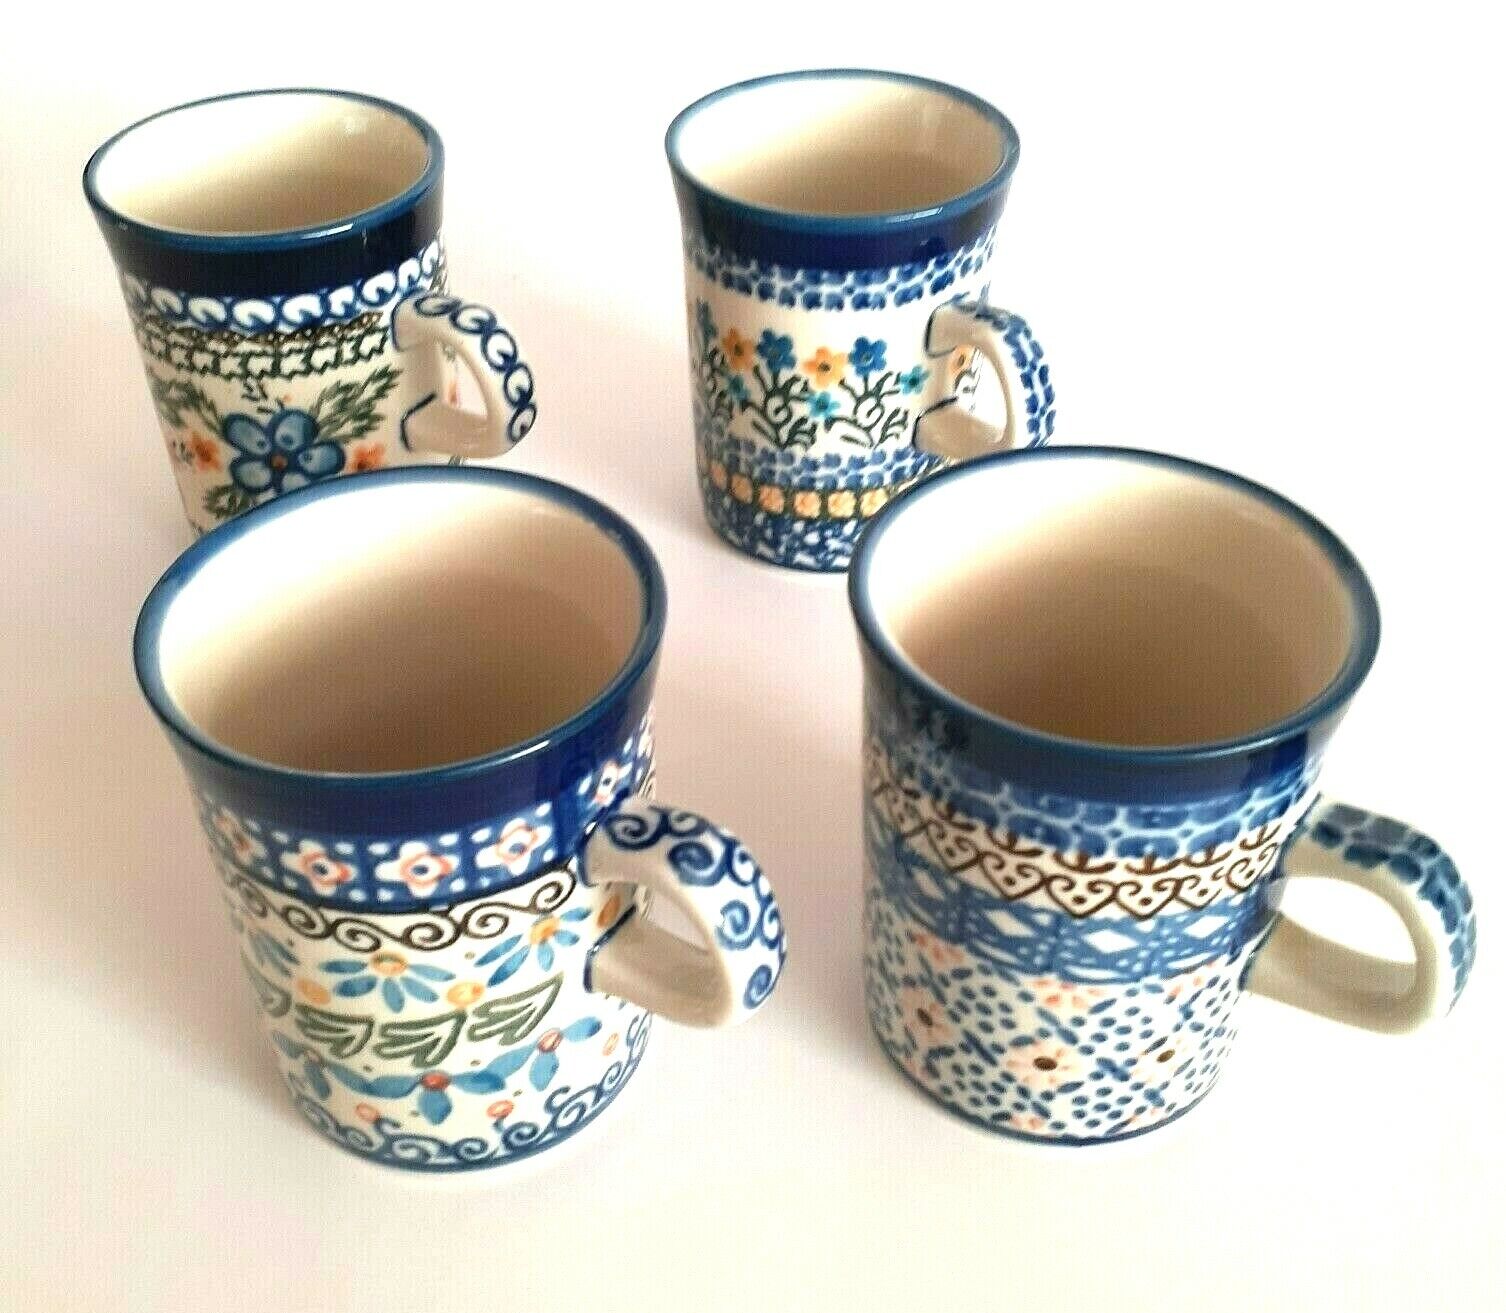 Polish Pottery 8 oz Coffee/Tea cups - Qty of 4 - all different designs/patterns Без бренда